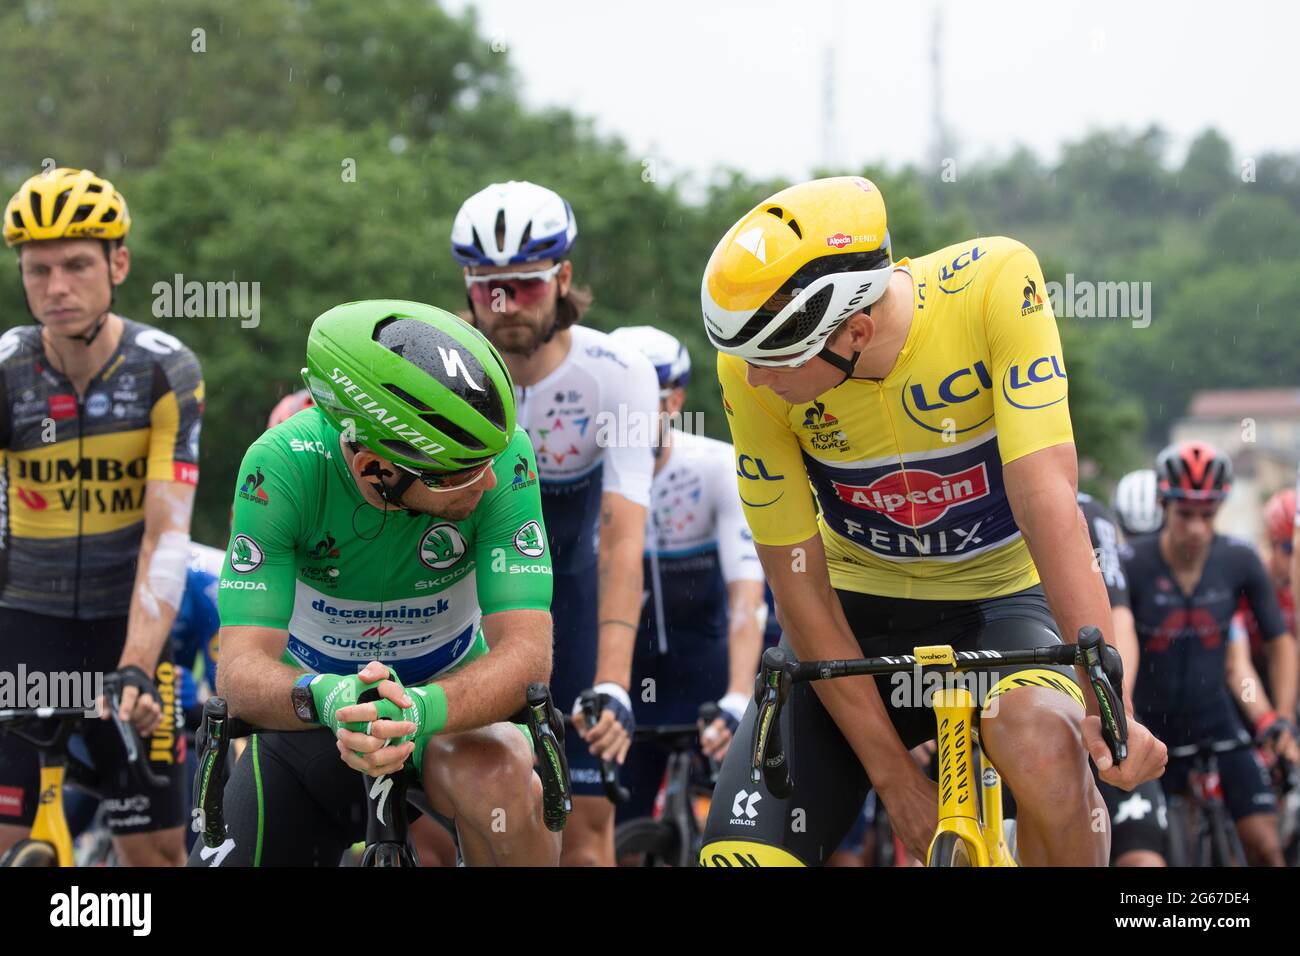 Oyonnax, France. 03 July 2021. Mathieu Van Der Poel and Mark Cavendish at the start of the 8th stage of the Tour de France in Oyonnax, France. Julian Elliott News Photography Credit: Julian Elliott/Alamy Live News Stock Photo